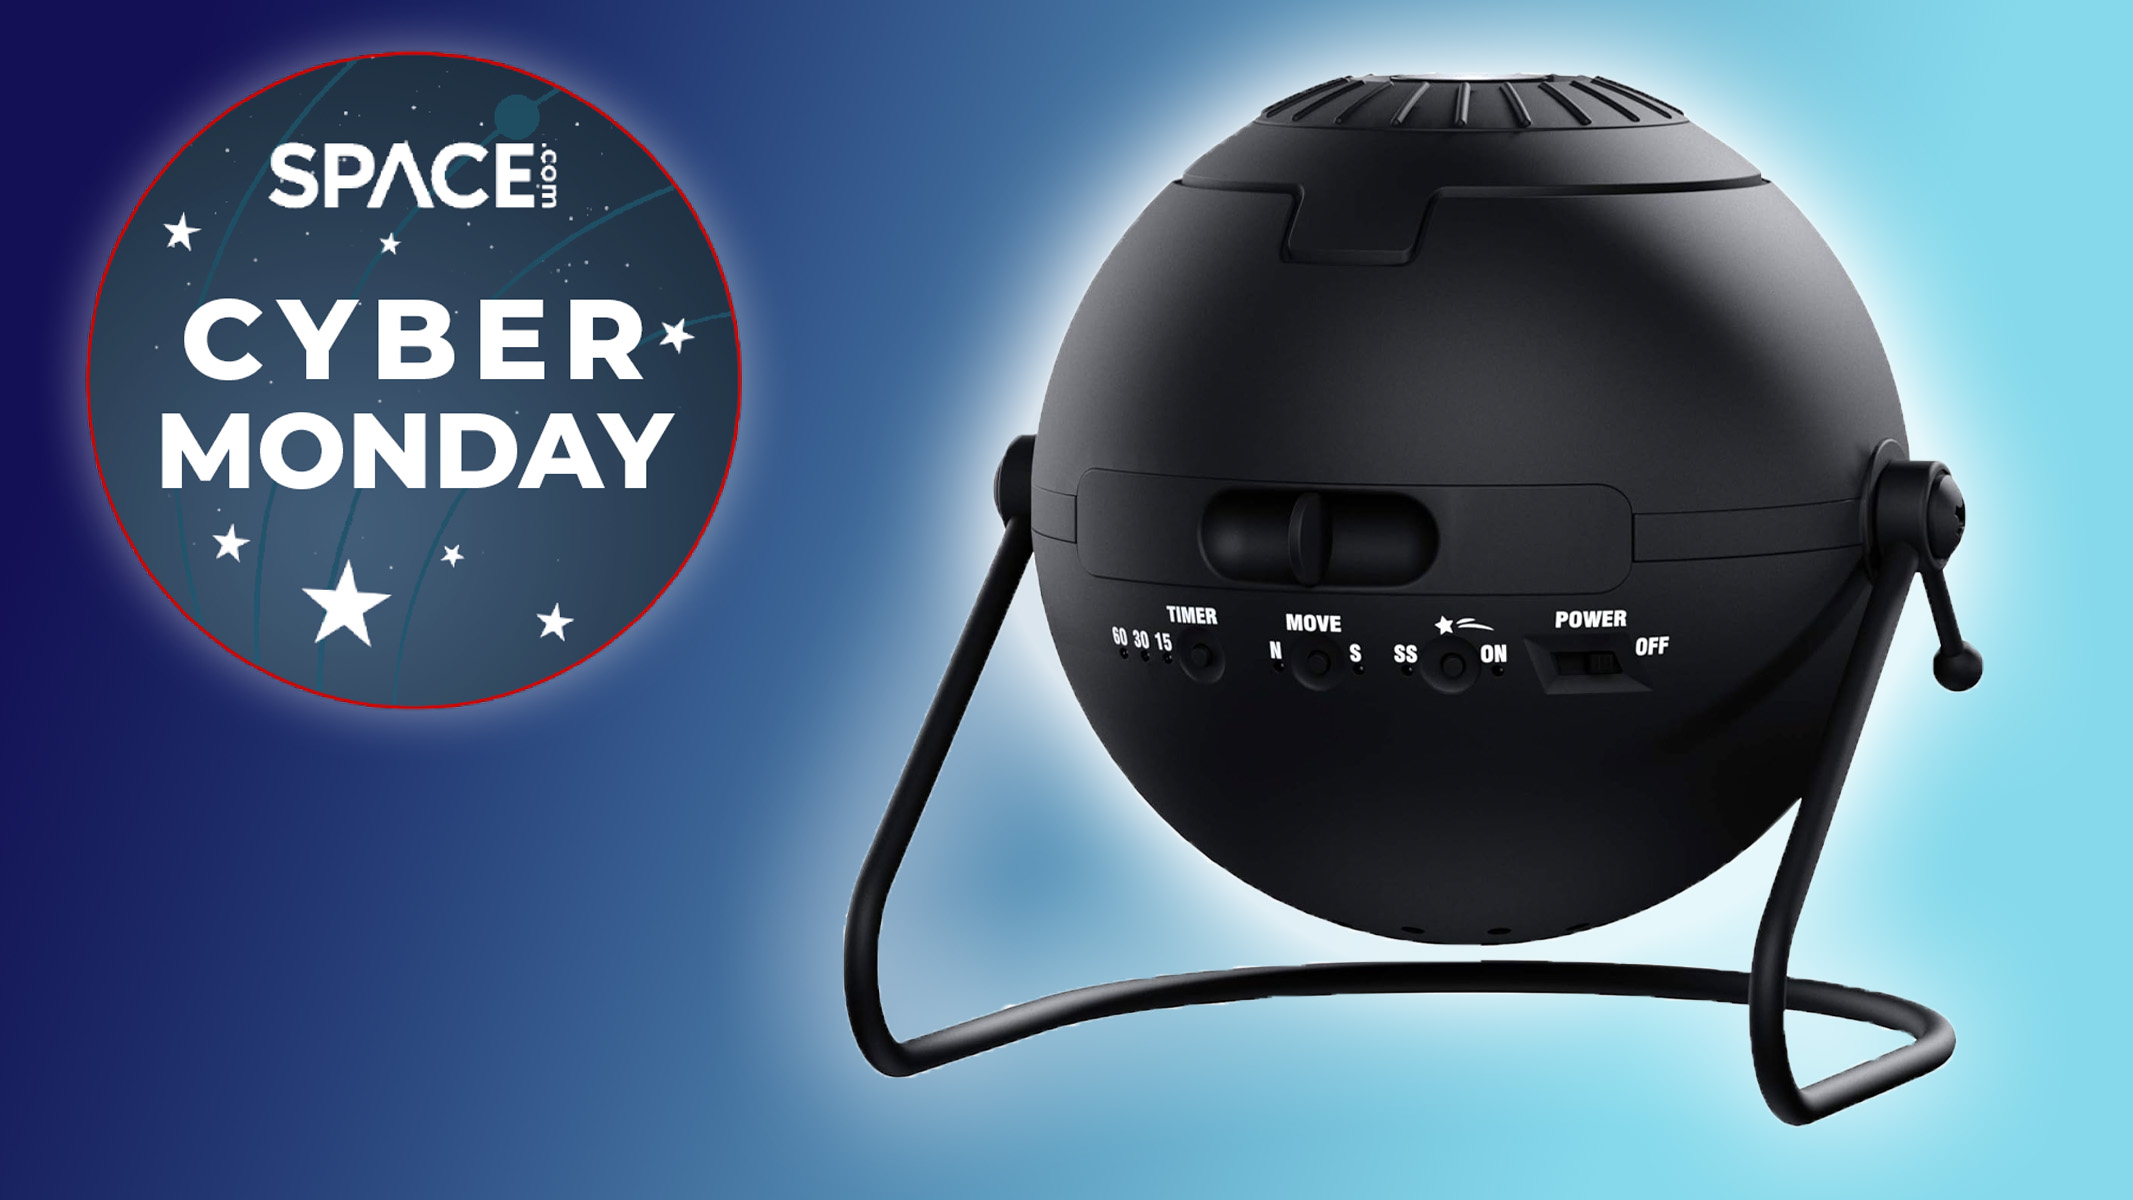 The sold-out Sega Toys star projector is back for Cyber Monday!